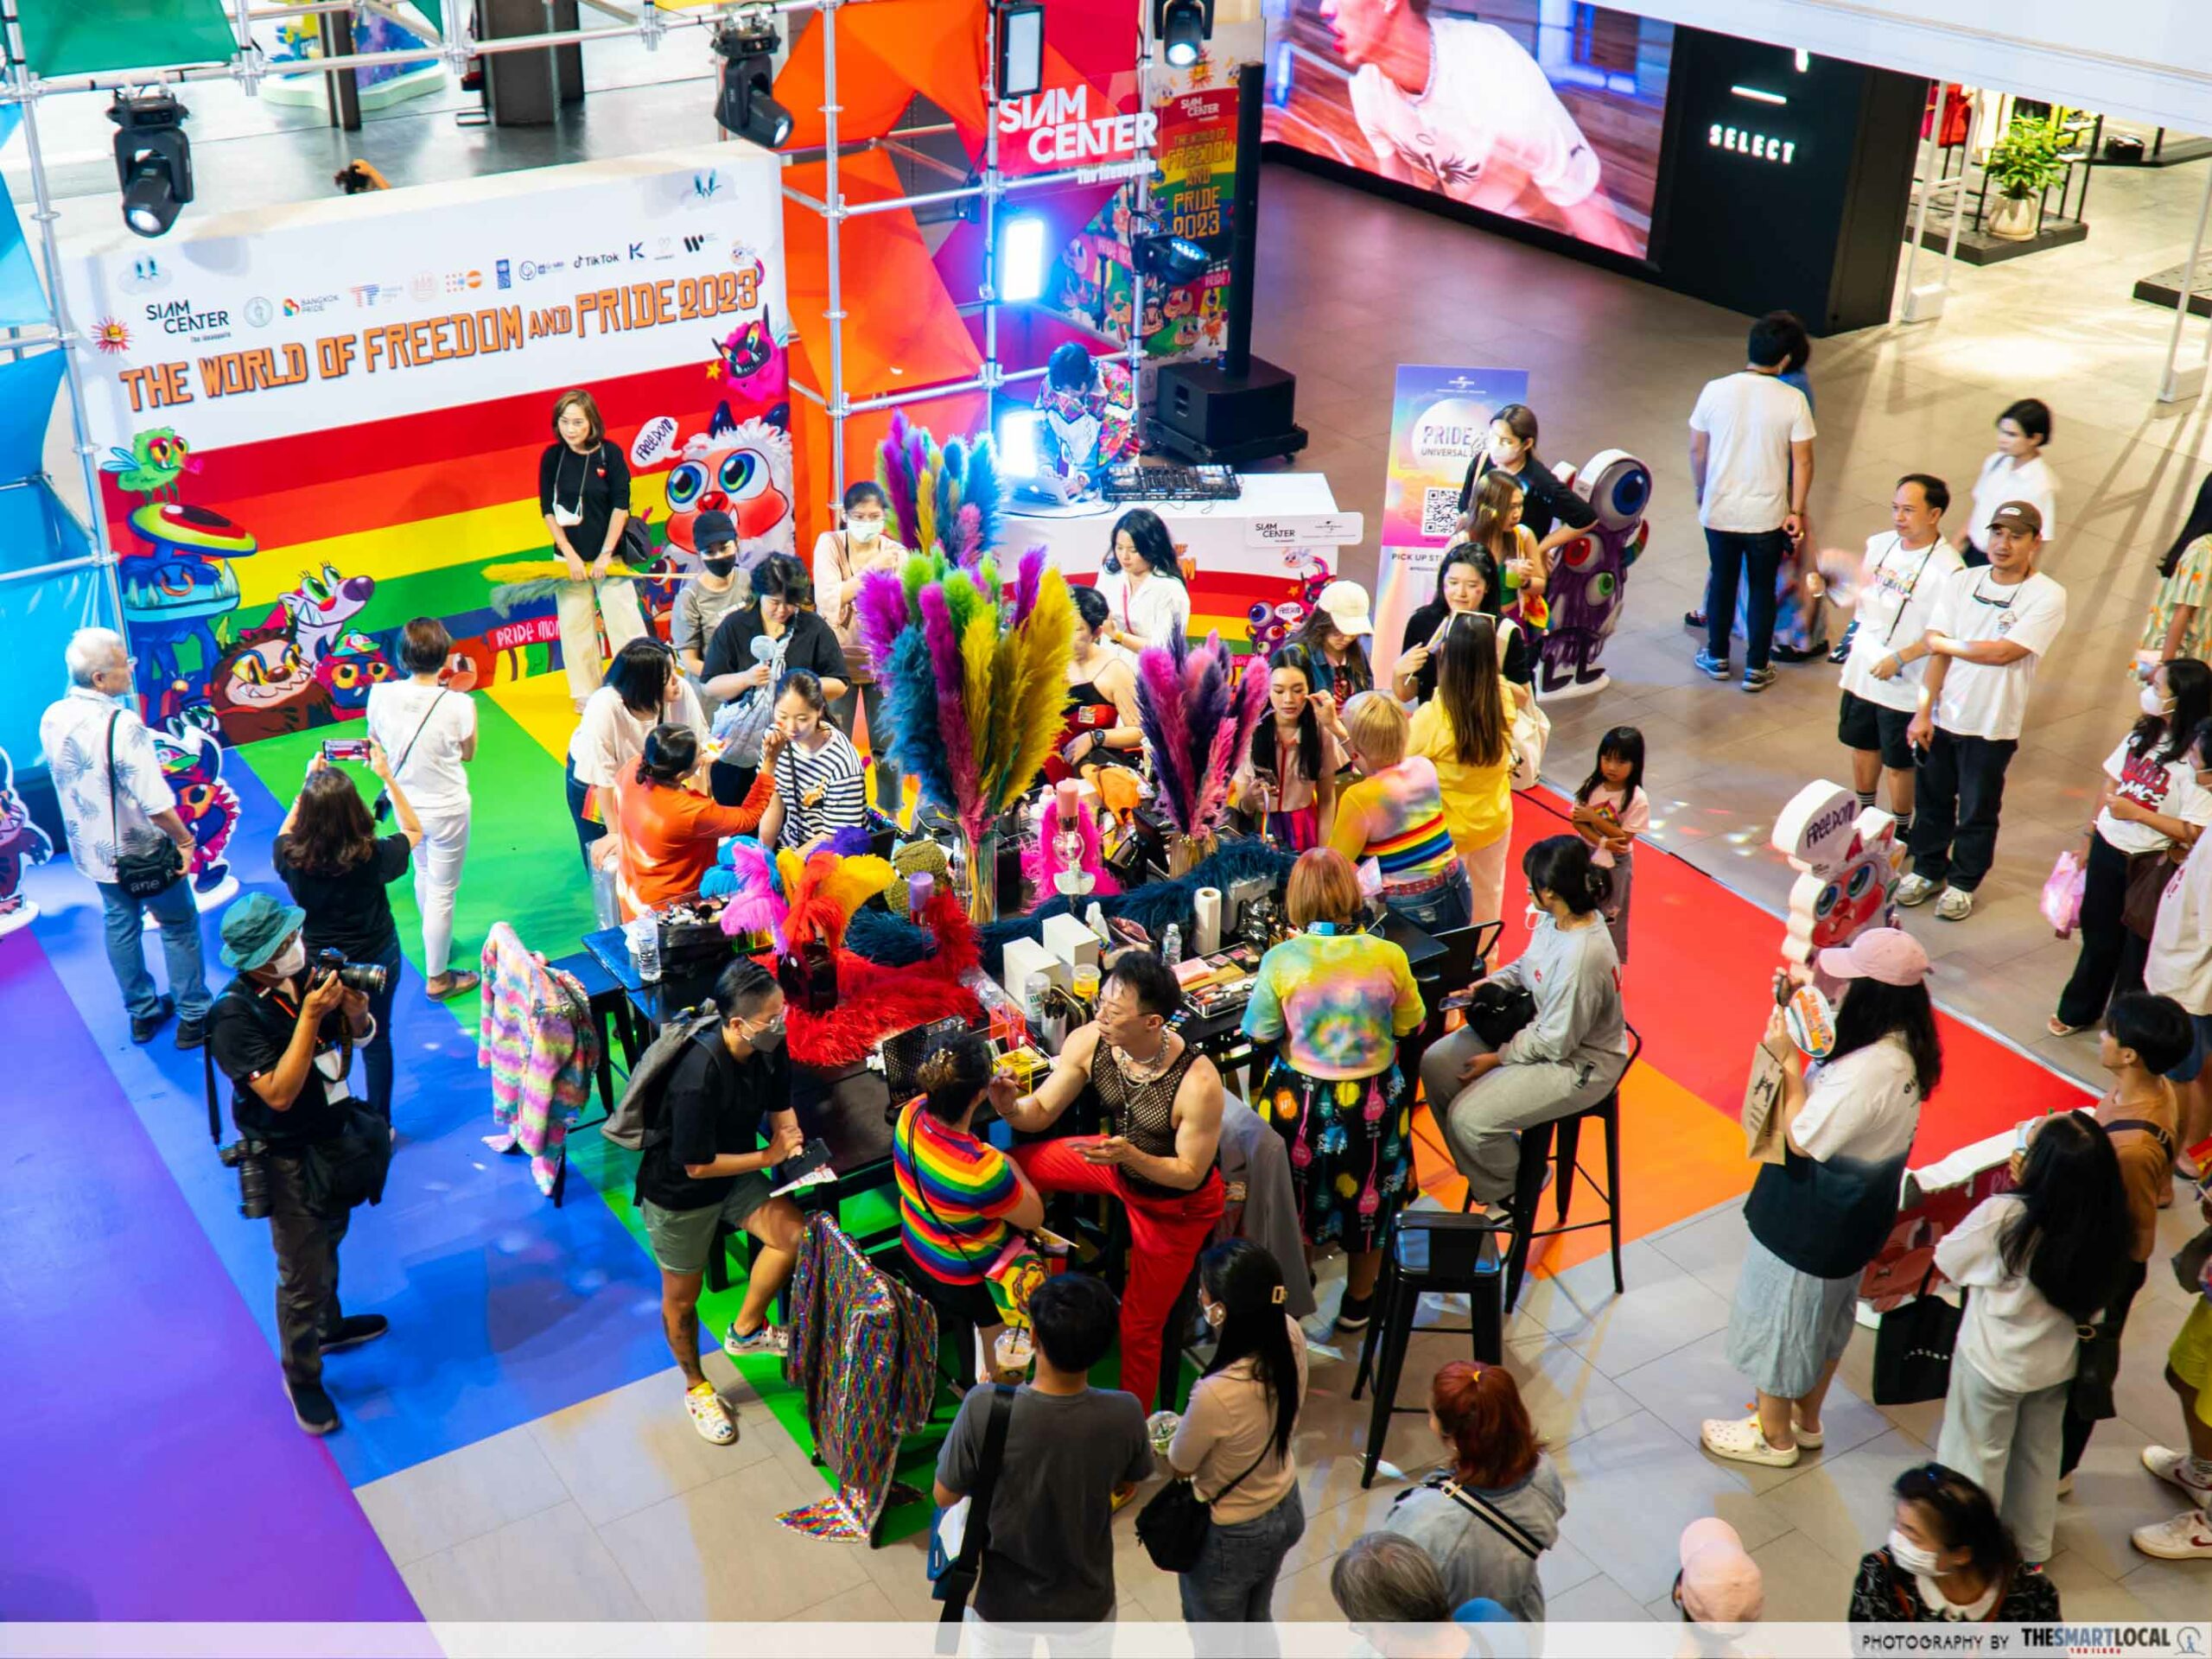 A make-up counter in Siam Center during the Pride Parade